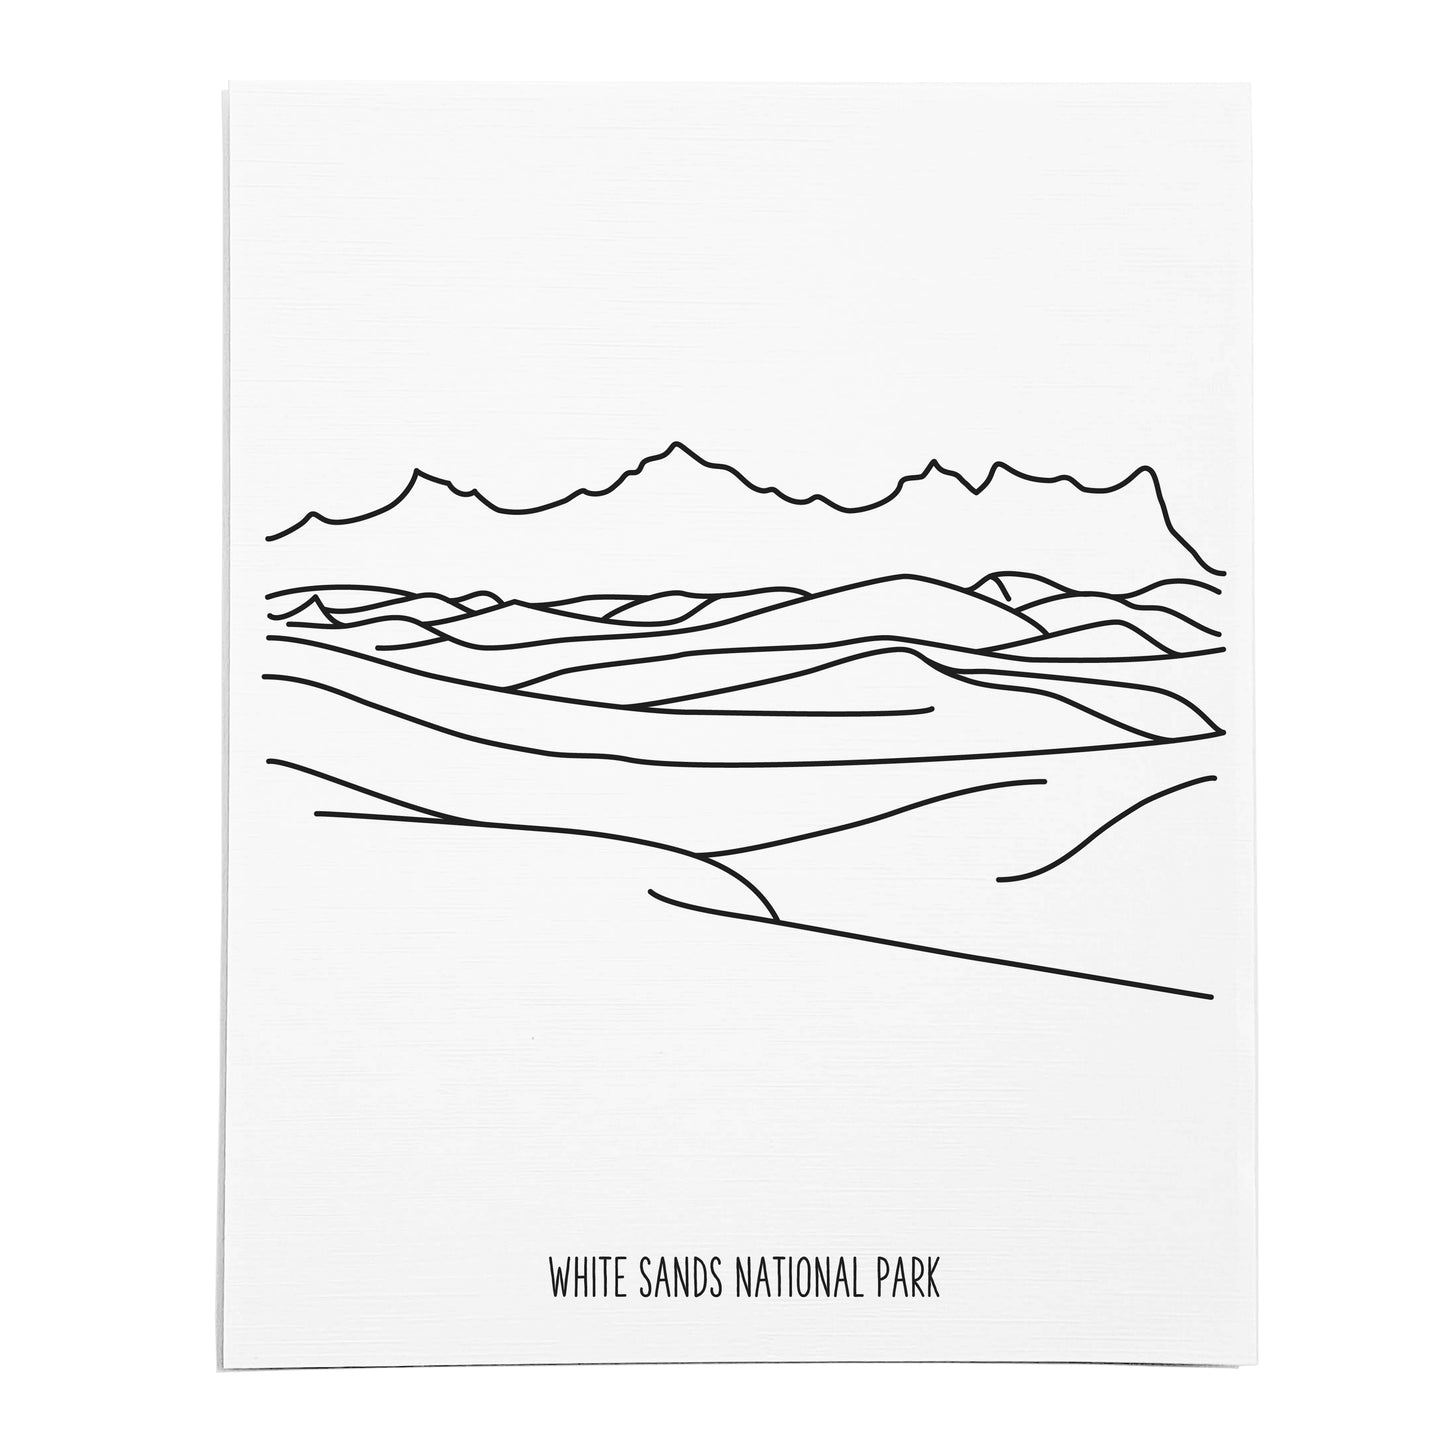 An art print featuring a line drawing of White Sands National Park on white linen paper